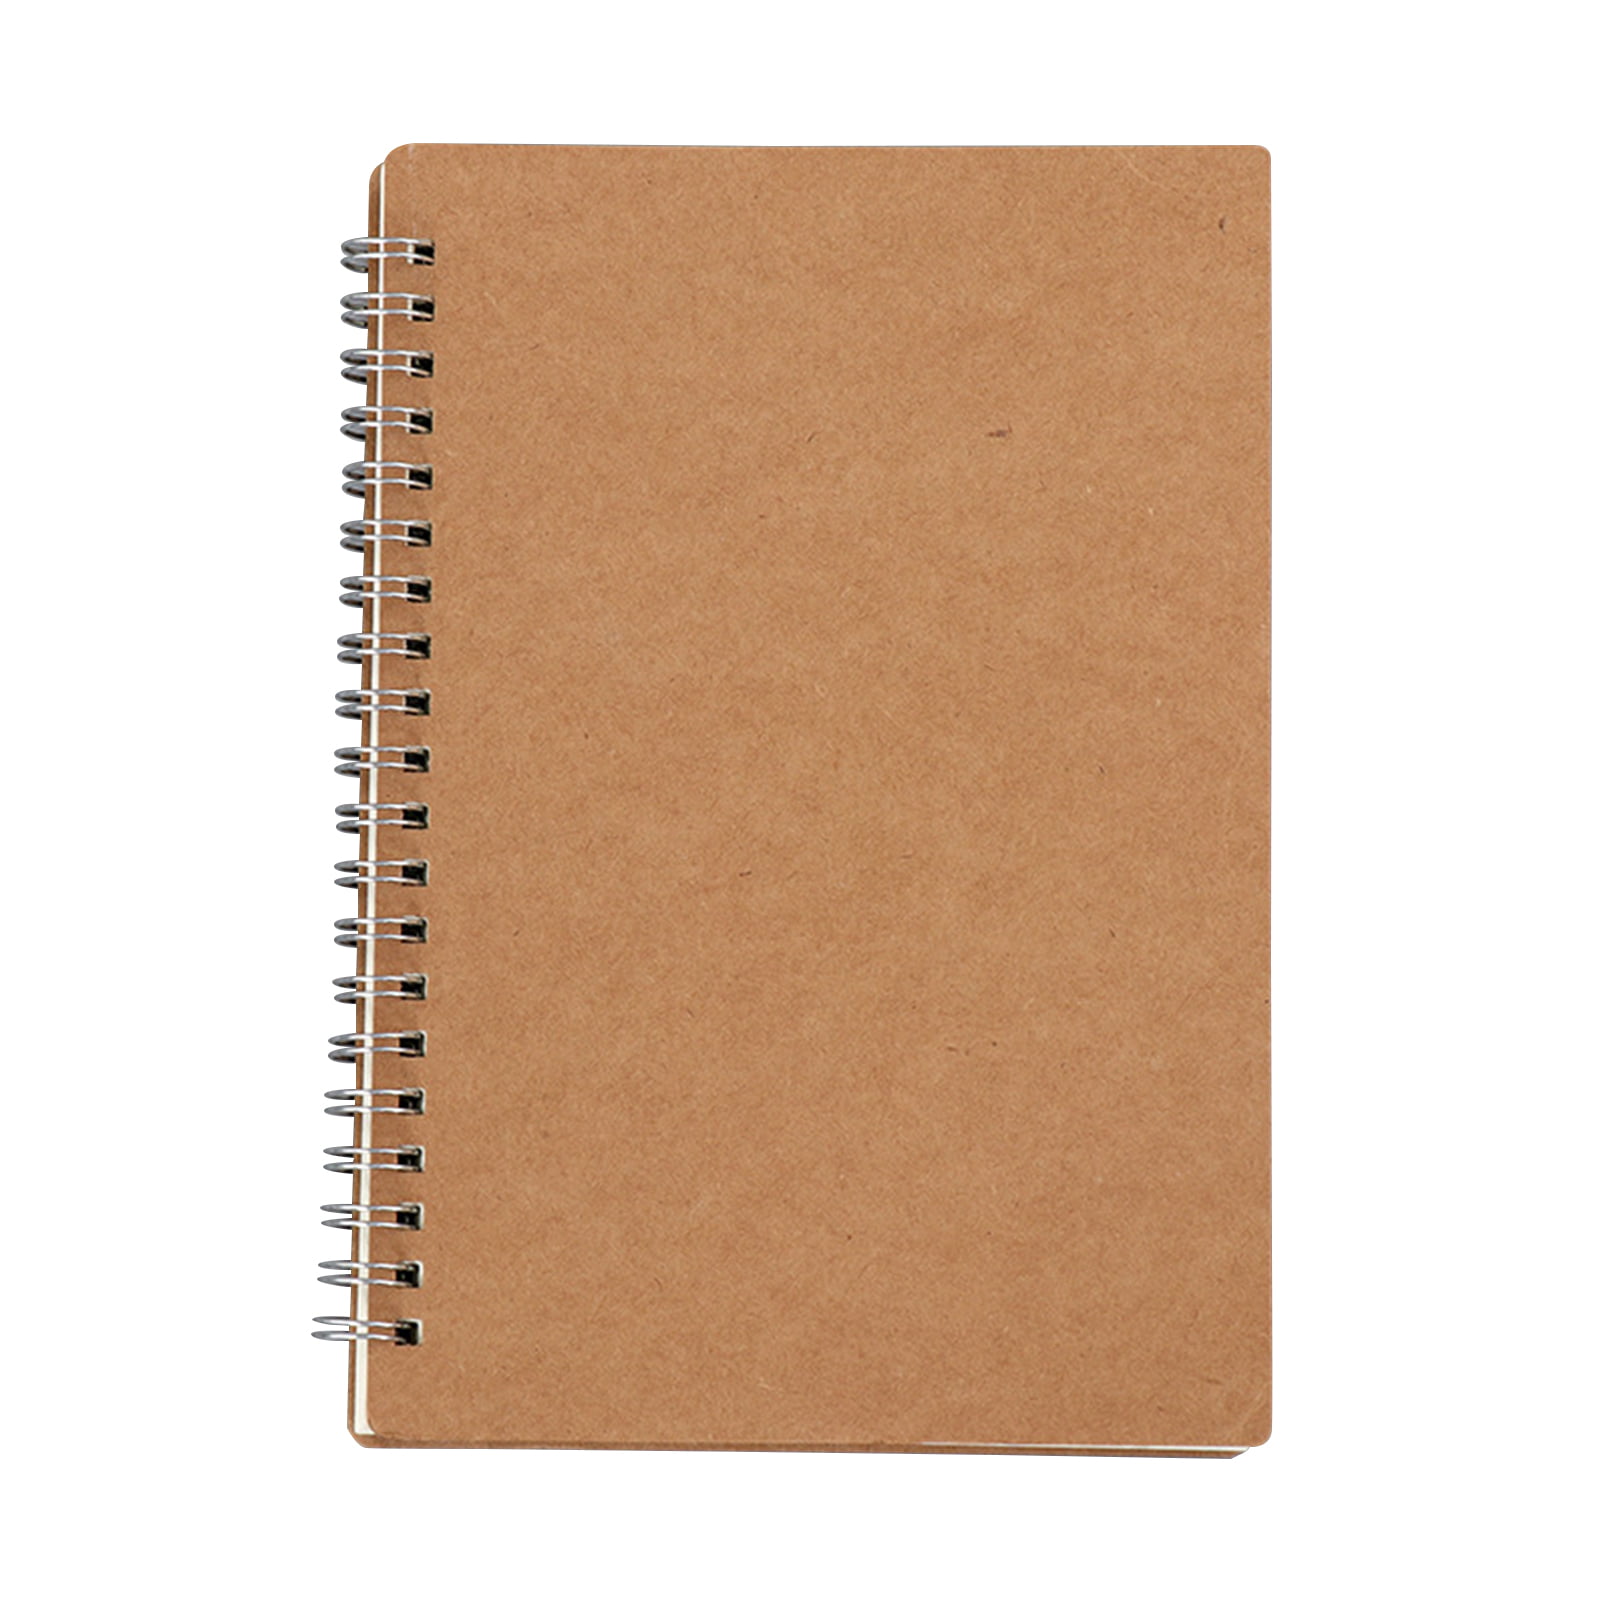 Academic Planner Hourly 2021-2022 Vertical Weekly & Monthly POPRUN Agenda August 2021 to Green 2022 with Pocket 6.5 x 8.75 Vegan Leather Hardcover Green Note & Address Pages 